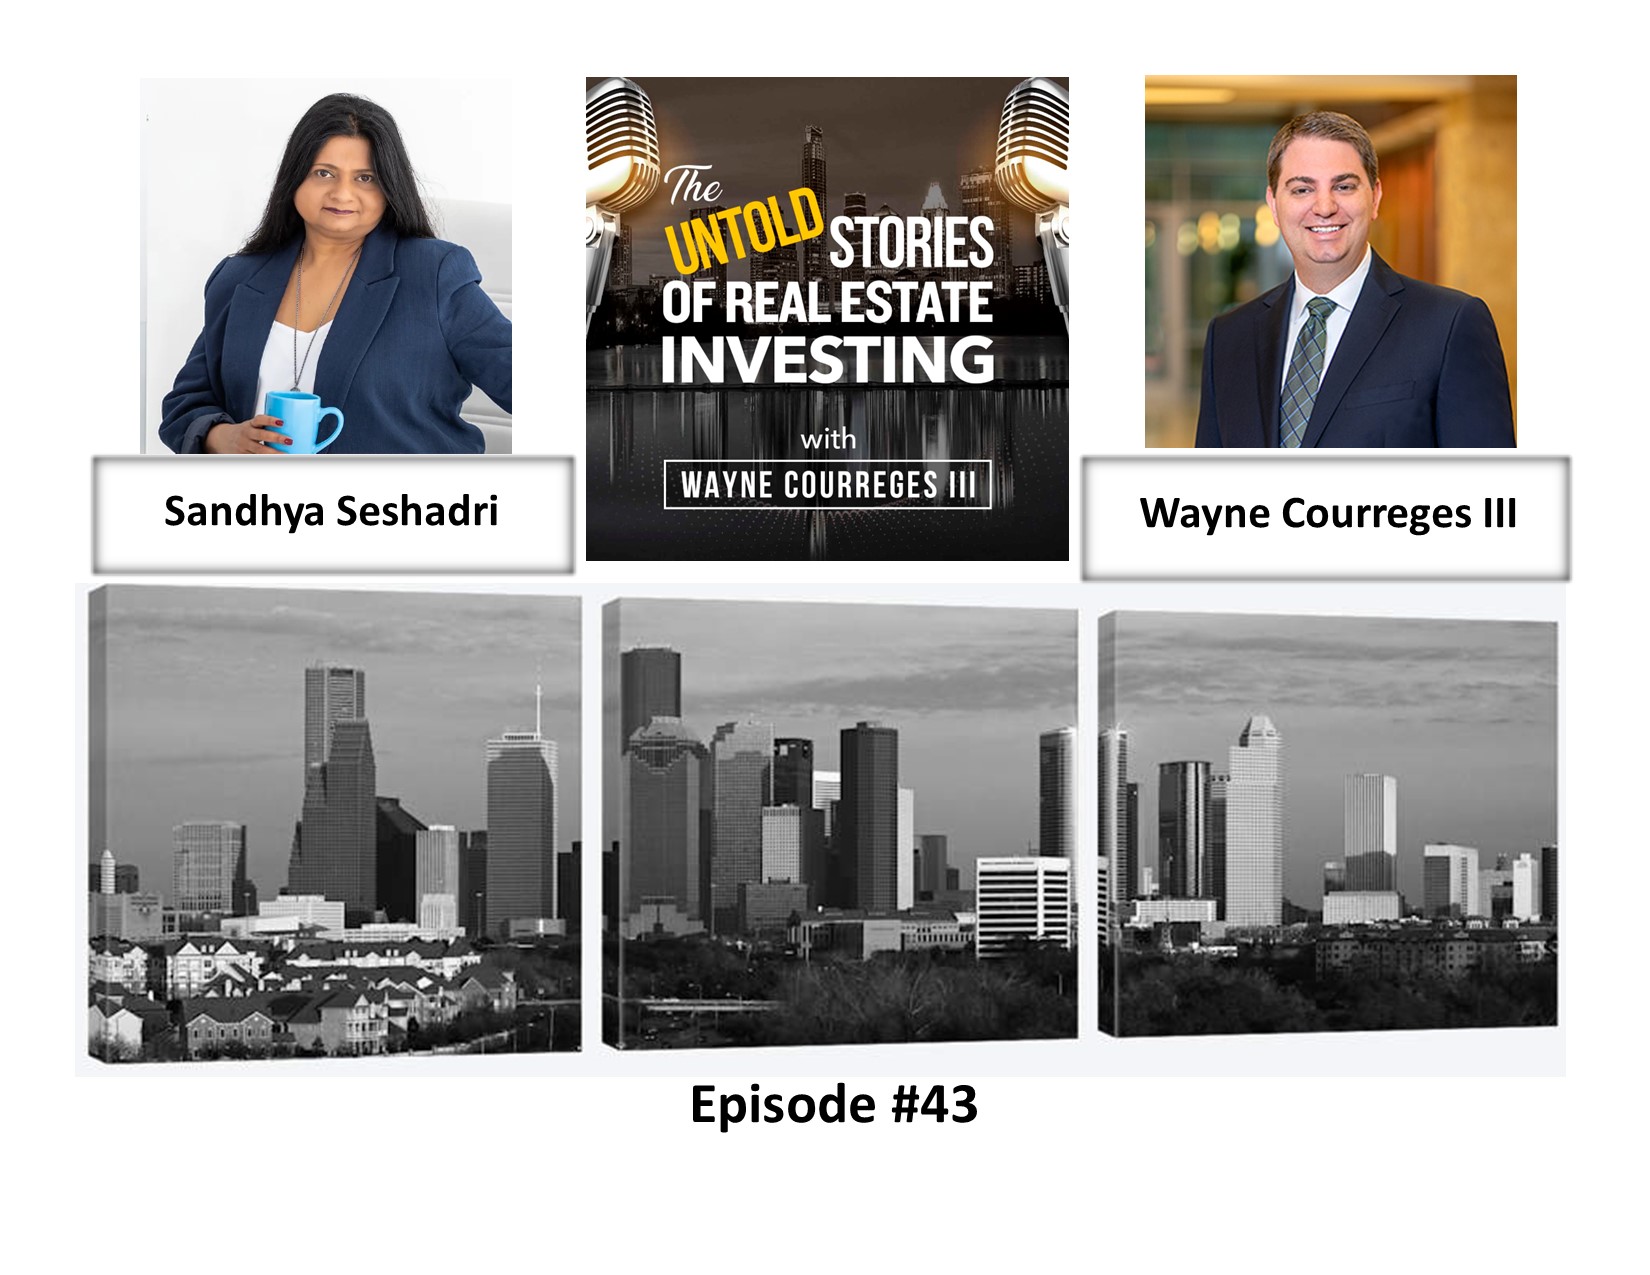 Sandhya Seshadri and Wayne Courreges on episode 43 of The Untold Stories of Real Estate Investing